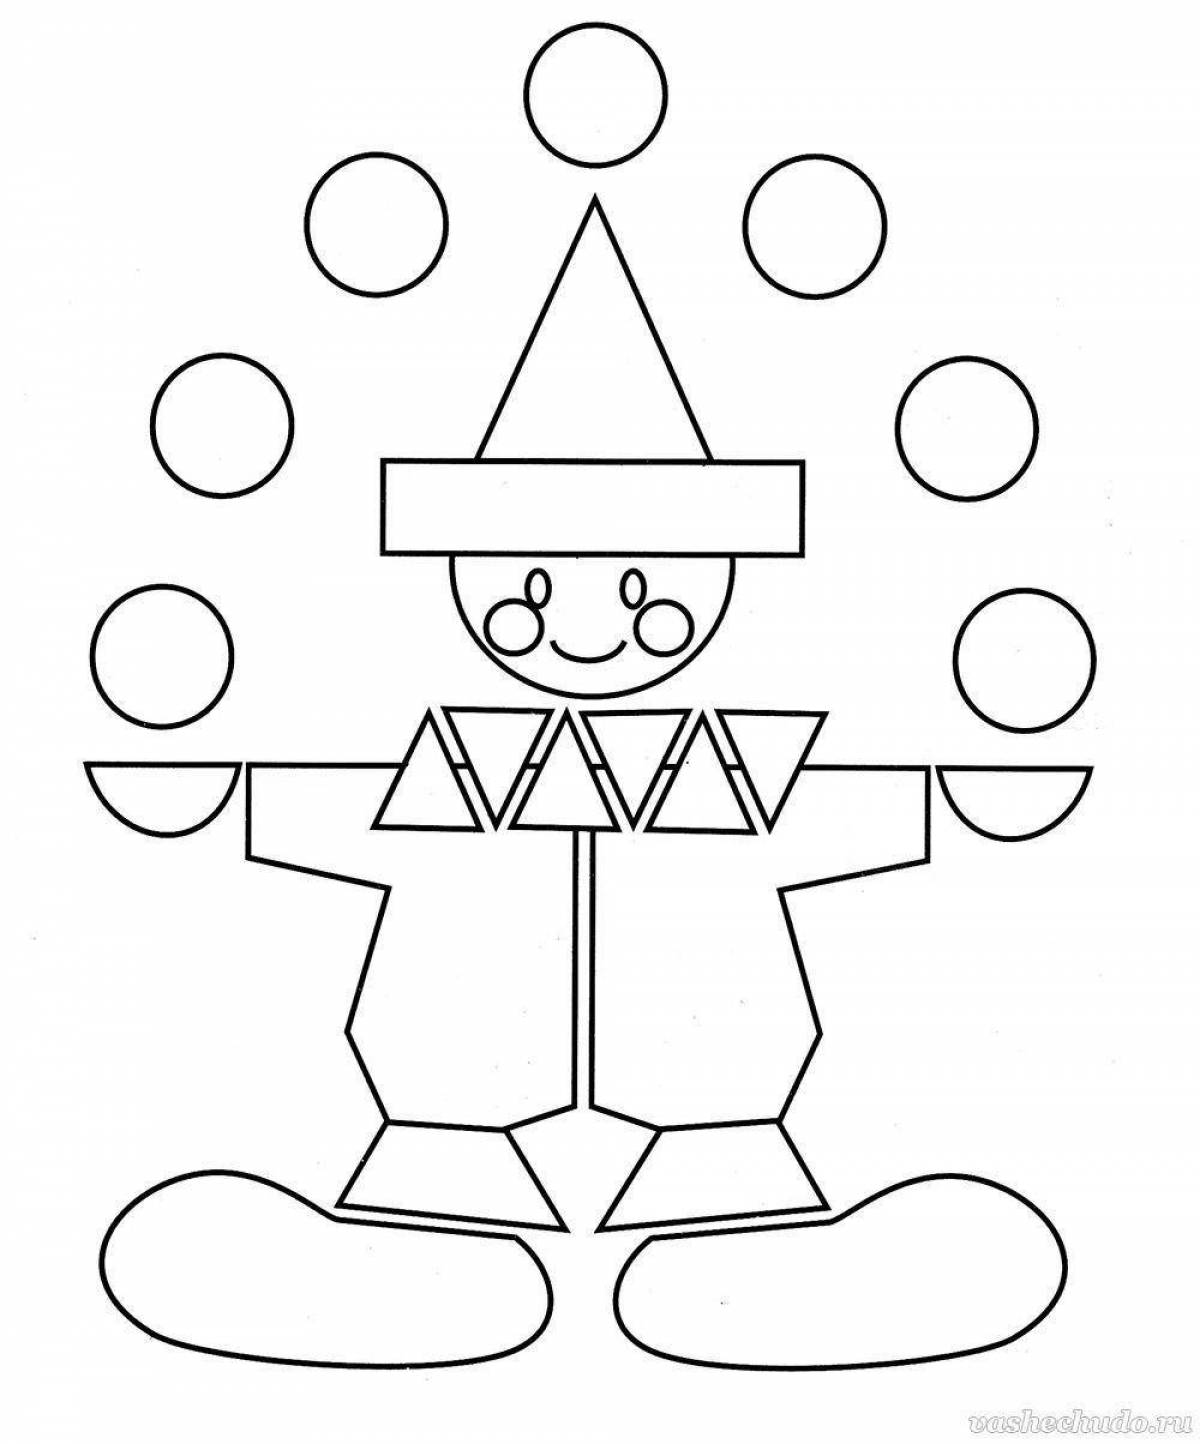 Coloring pages with vibrant geometric shapes for 3-4 year olds